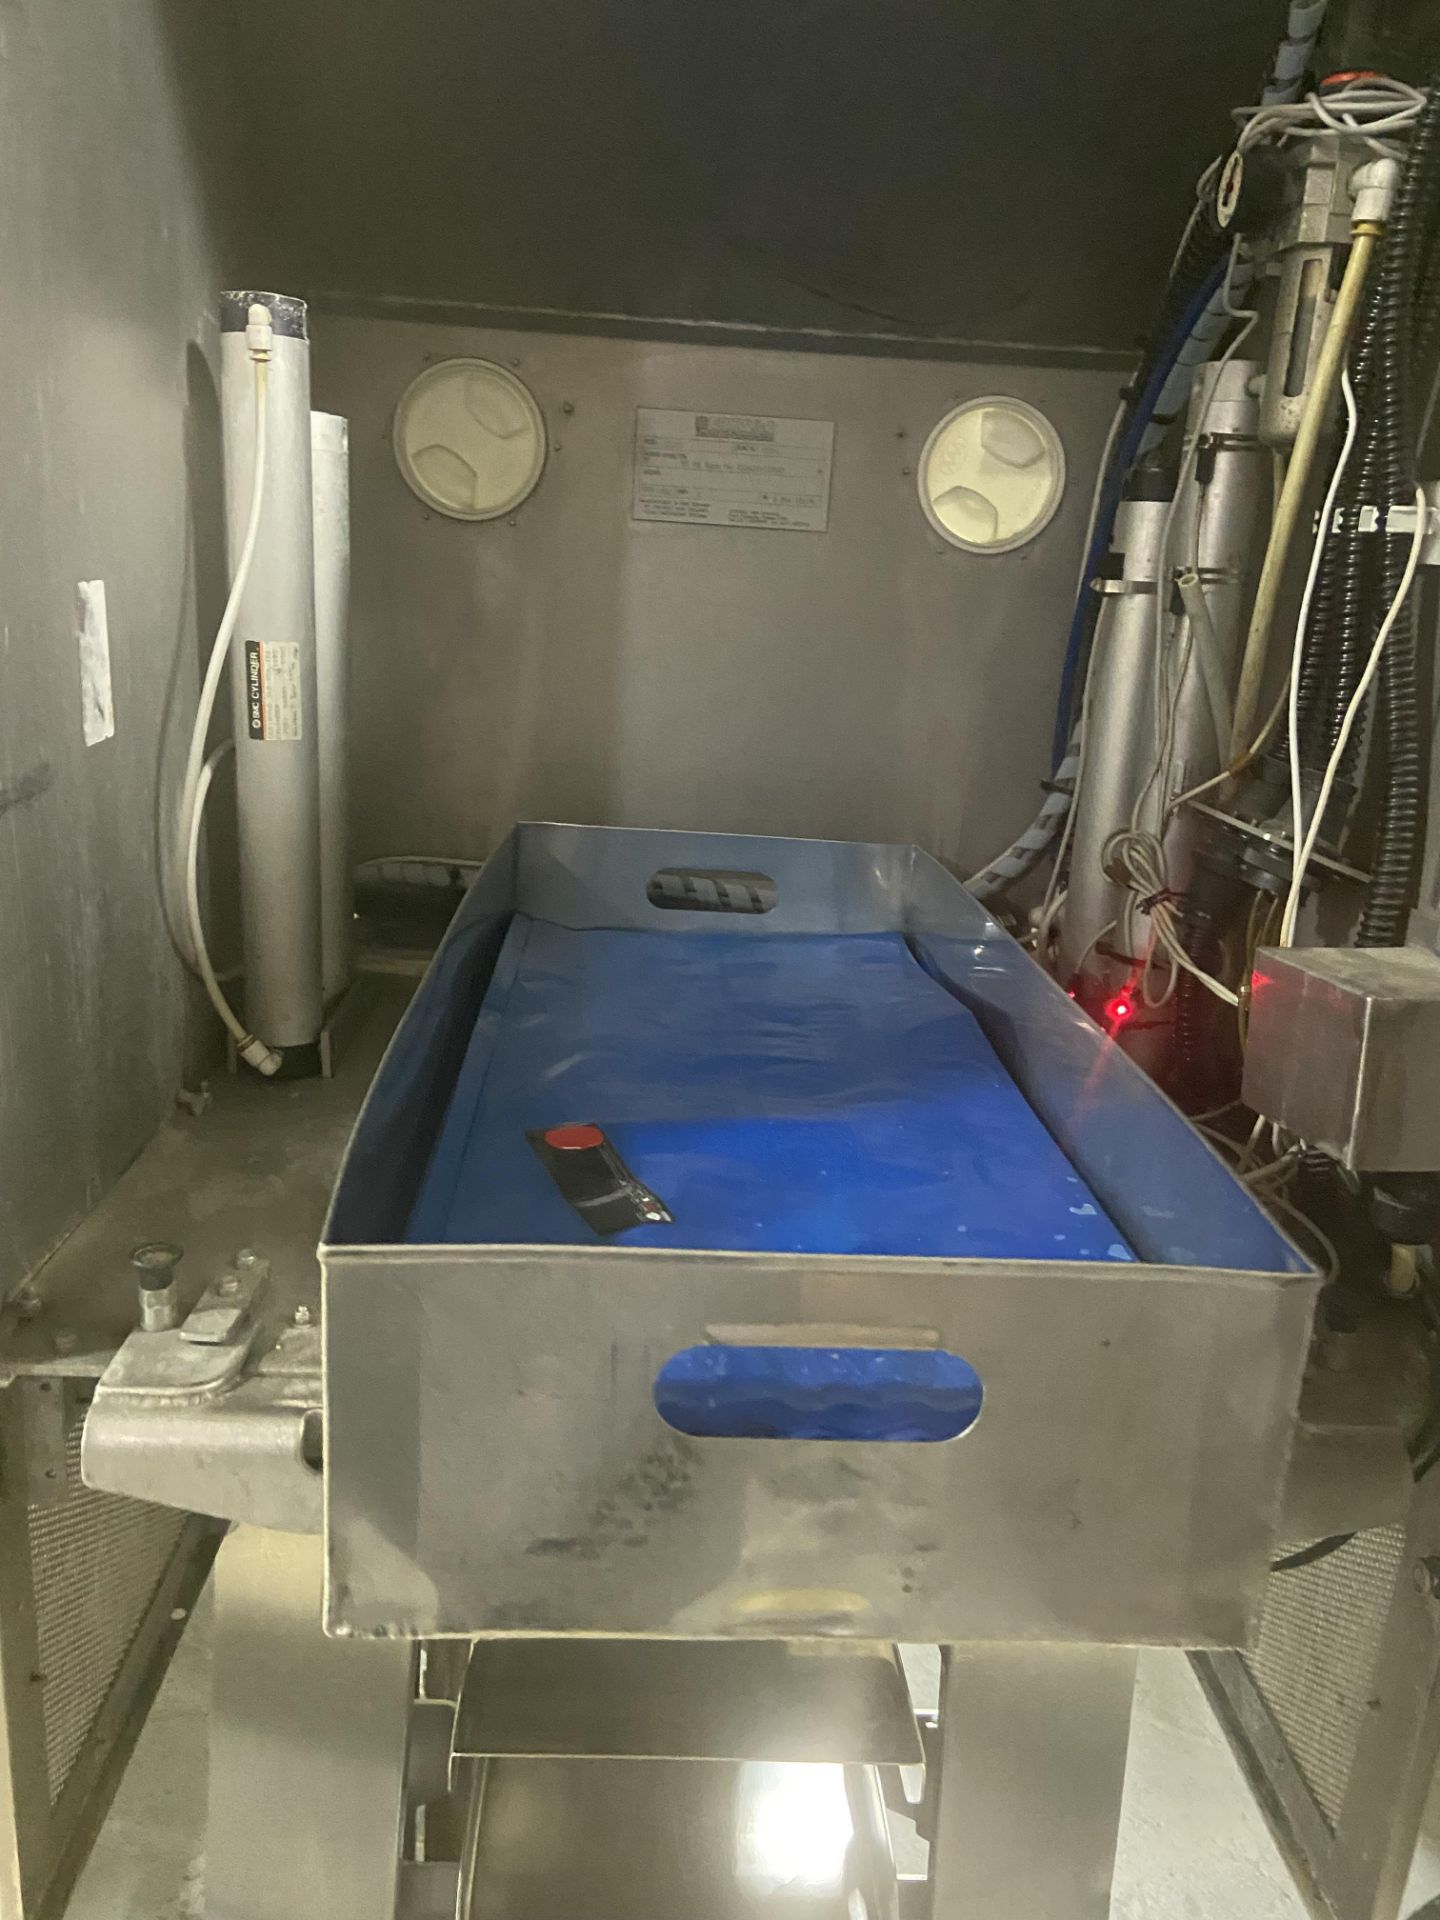 Stoelting (Relco)S/S Cheese Blocker with Cyrovac CL20 Bagger, M/N C120, S/N 01104, with - Image 4 of 12